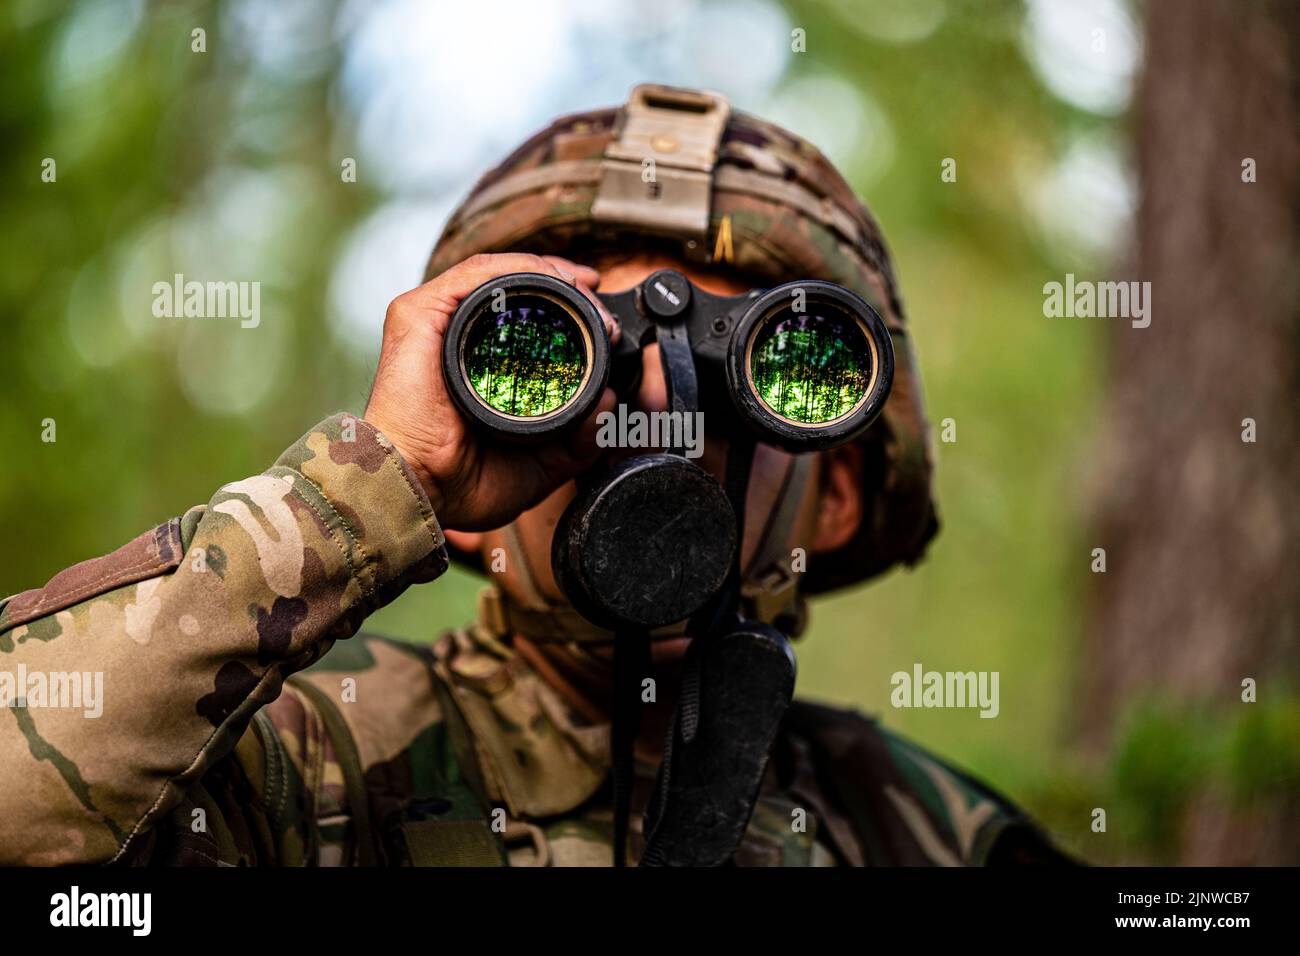 Niinisalo, Finland. 28th July, 2022. A U.S. Soldier with 4th Squadron, 10th Cavalry Regiment, 3rd Armored Brigade Combat Team, 4th Infantry Division, uses binoculars at an observation post during Vigilant Fox, a joint exercise including Finnish soldiers, U.S. Soldiers, and British soldiers assigned to the 2nd Battalion, Rifles Regiment, at Niinisalo, Finland, July 28, 2022. The 3/4th ABCT is among other units assigned to the 1st Infantry Division, proudly working alongside NATO allies and regional security partners to provide combat-credible forces to V Corps, America's forward deployed corps Stock Photo